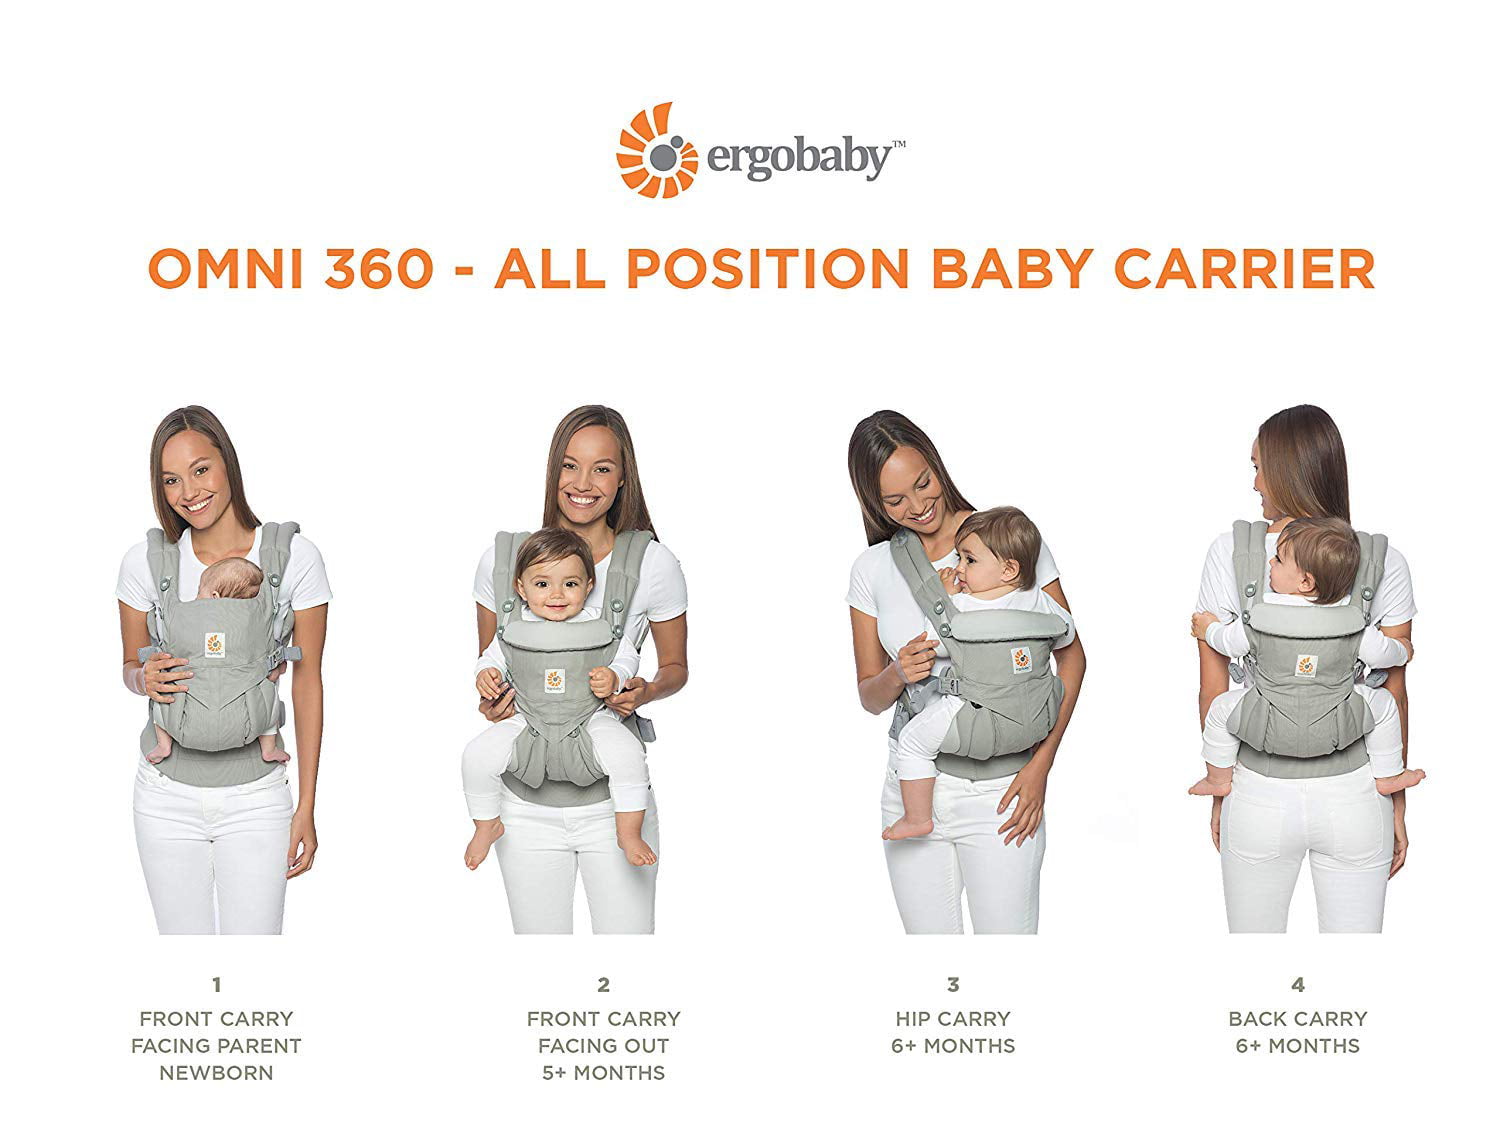 ergo baby carrier 3 month old